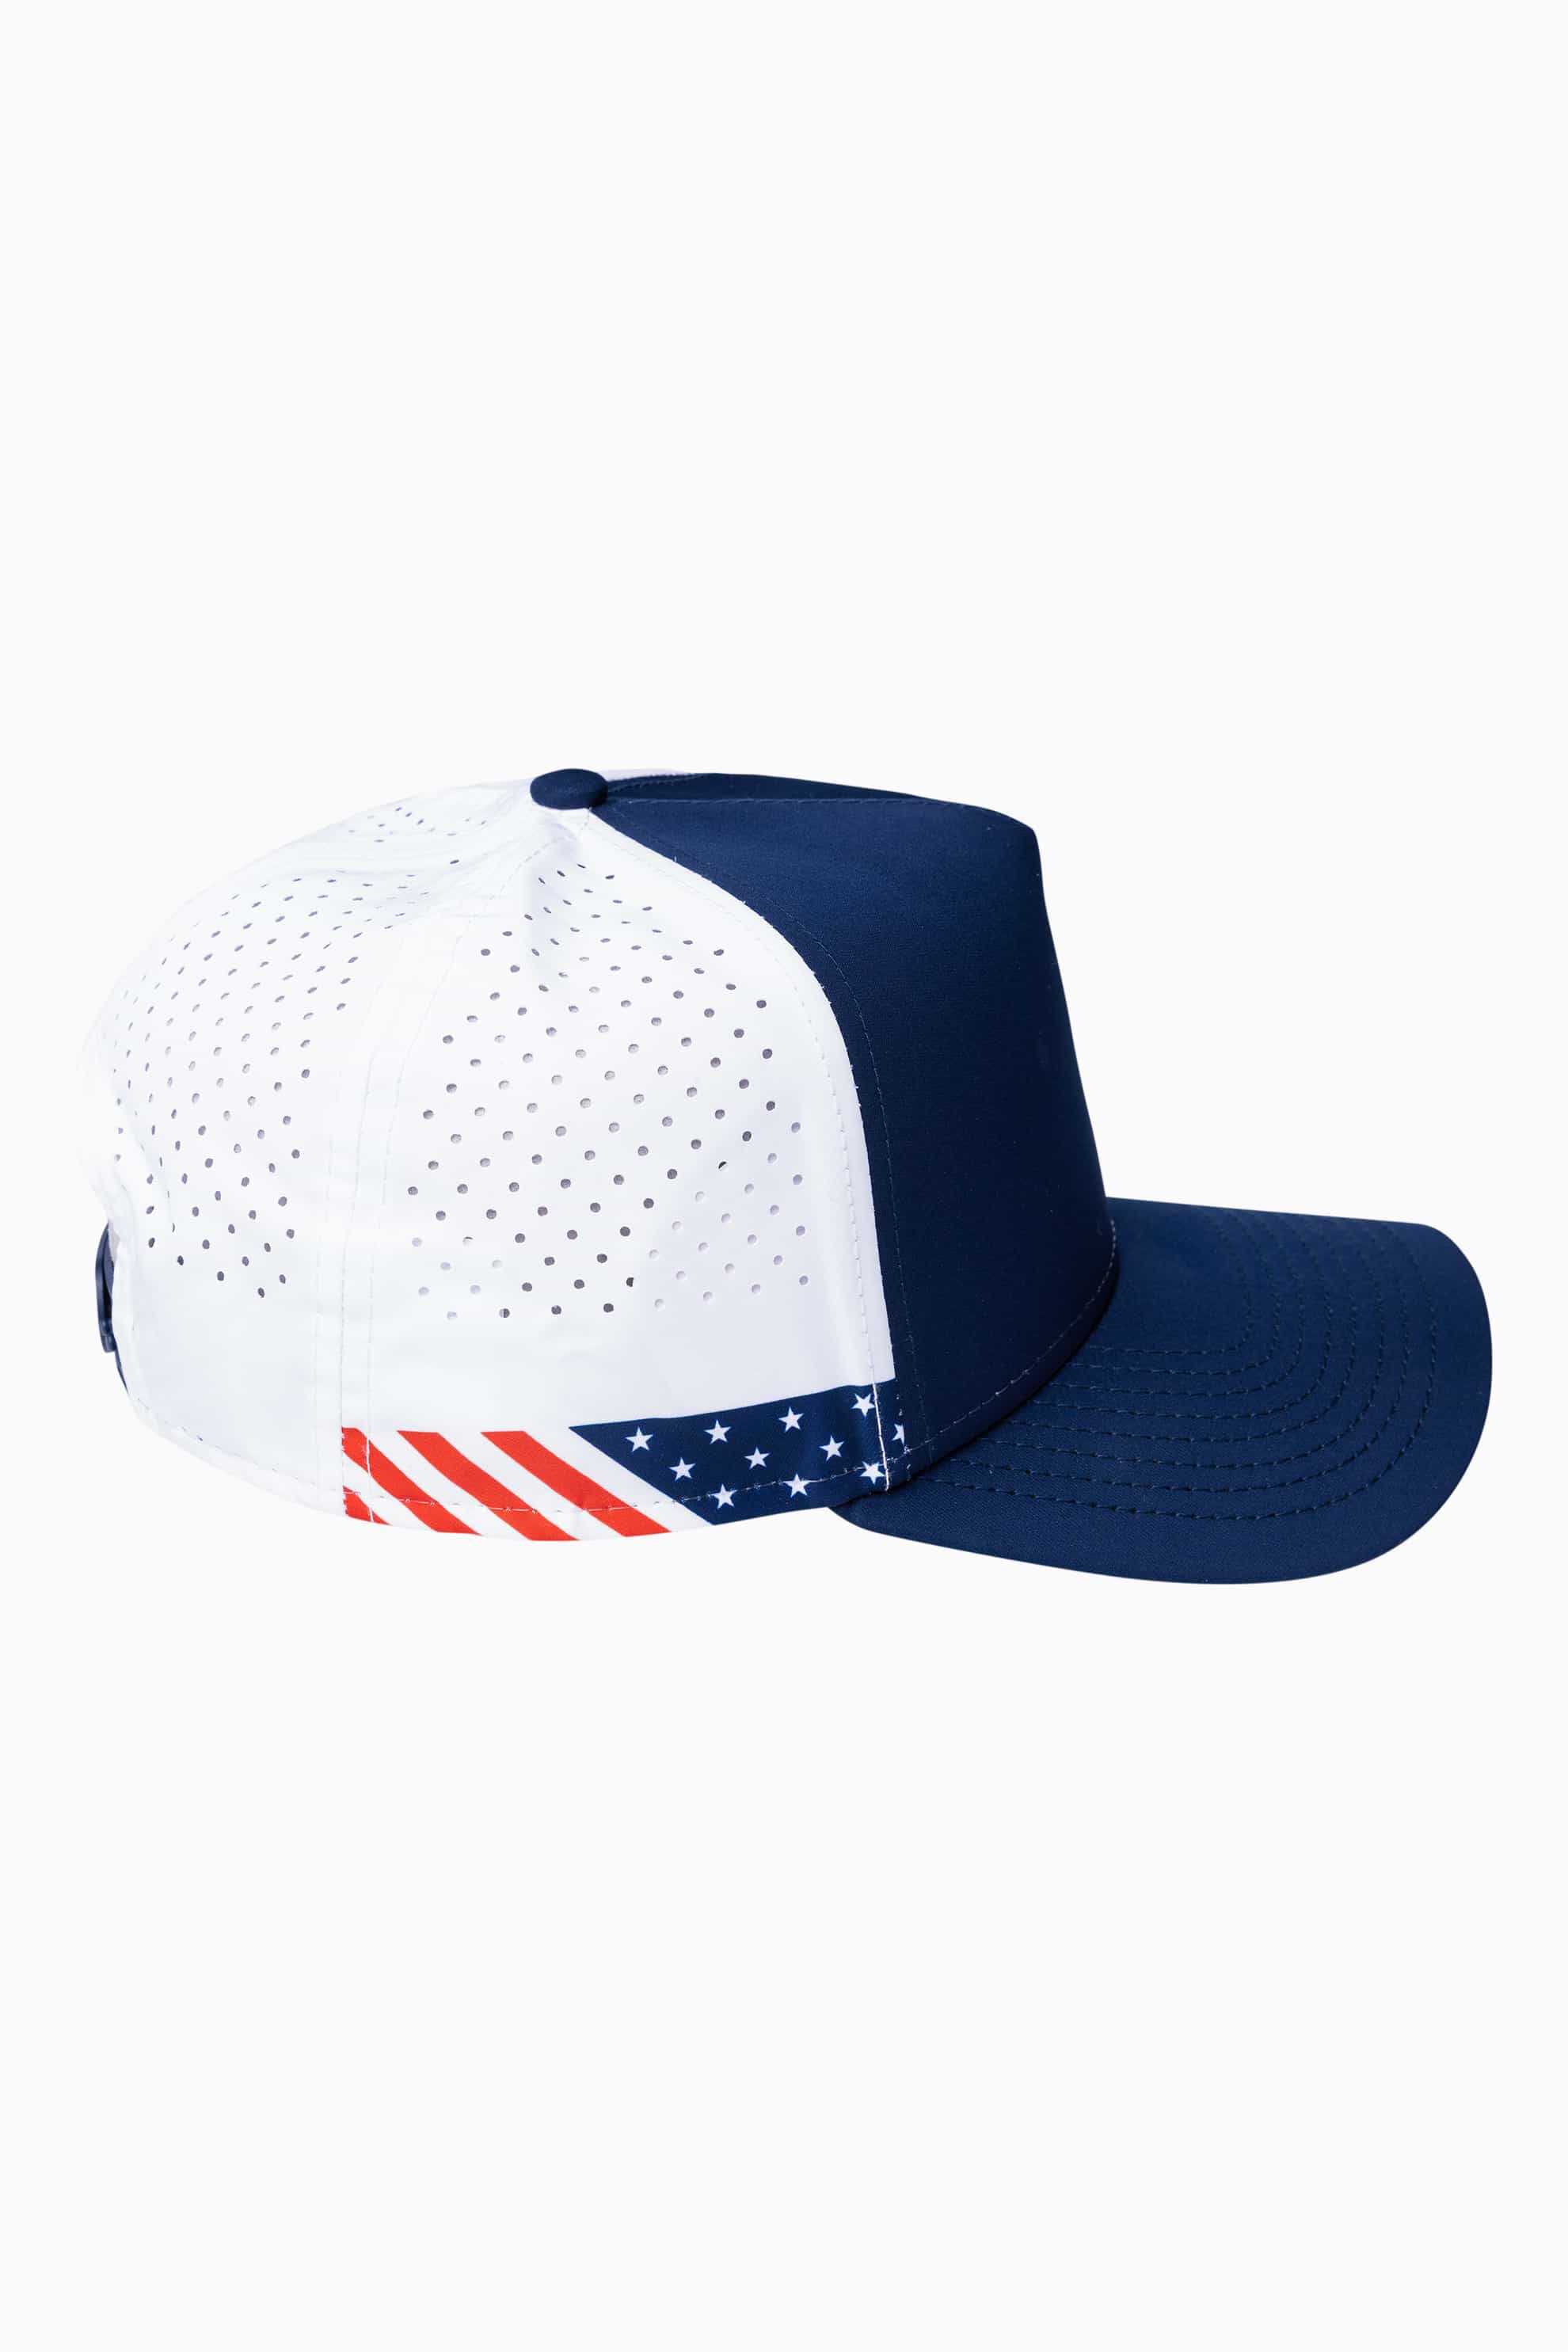 Buy Stars & Stripes 9FORTY A-Frame Cap | PXG